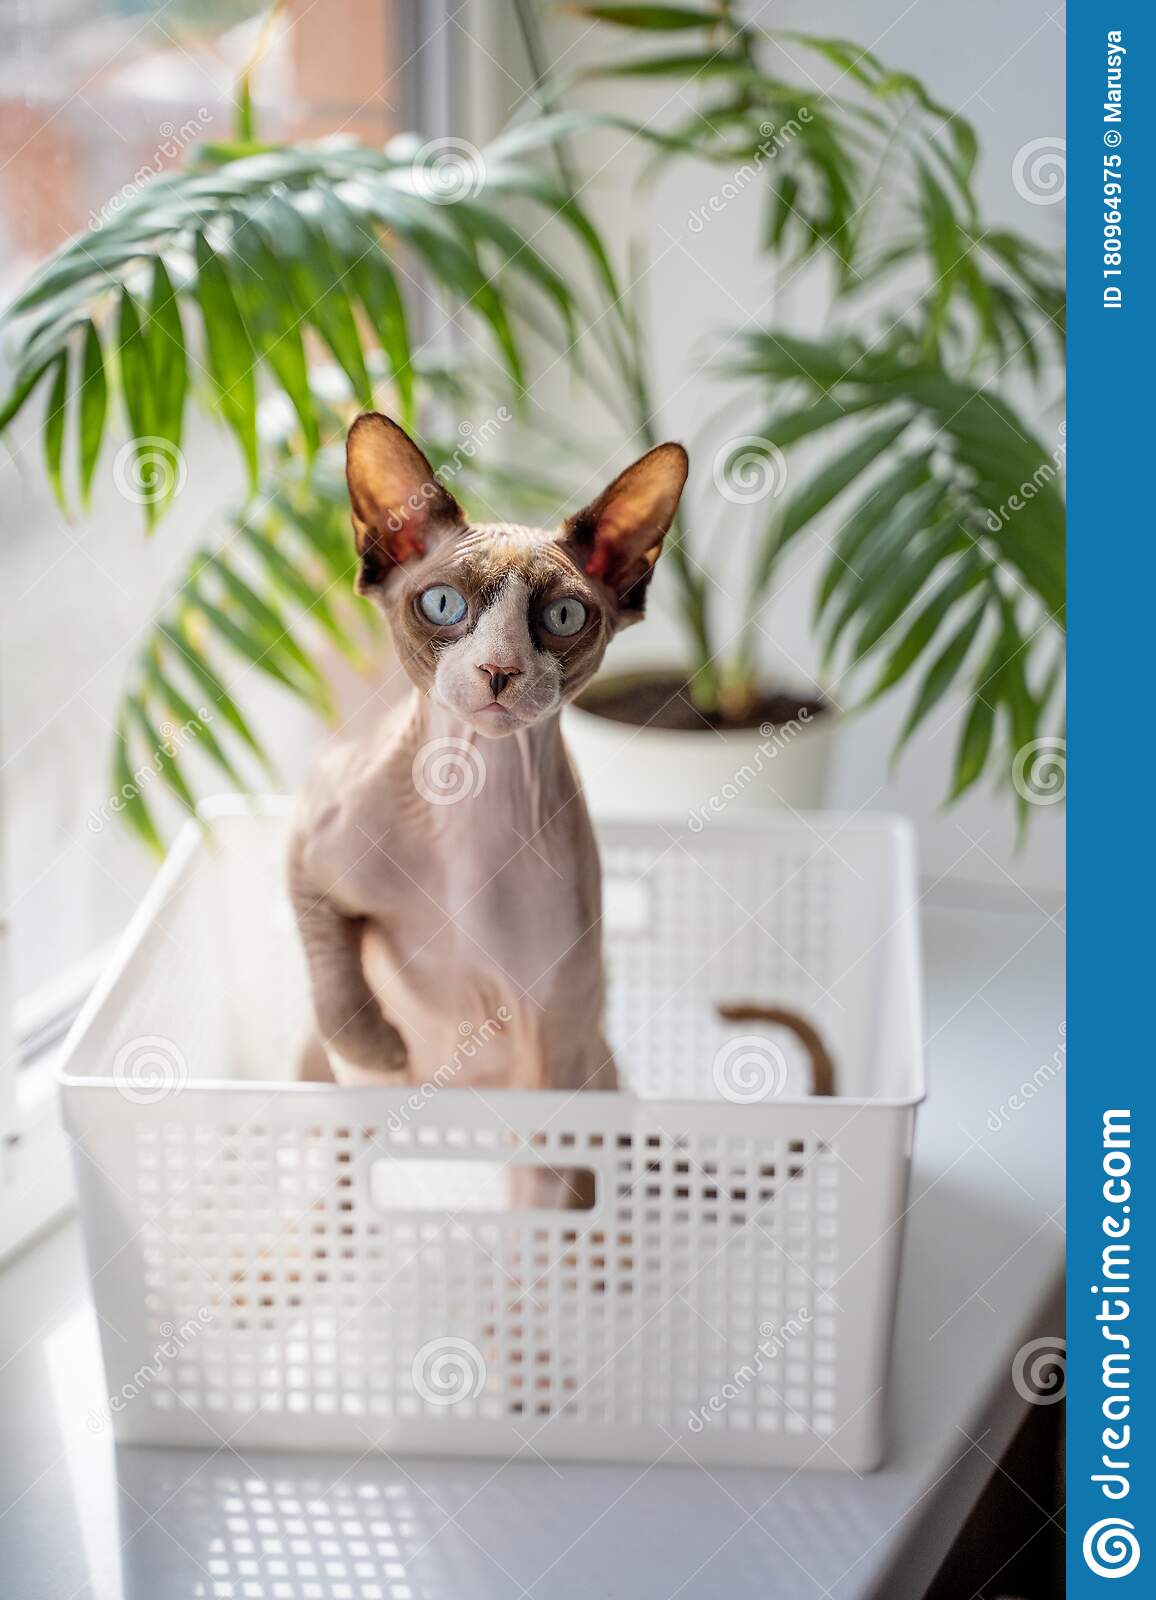 Sphynx Cat With Blue Eyes Sits In A Basket Stock Image ...